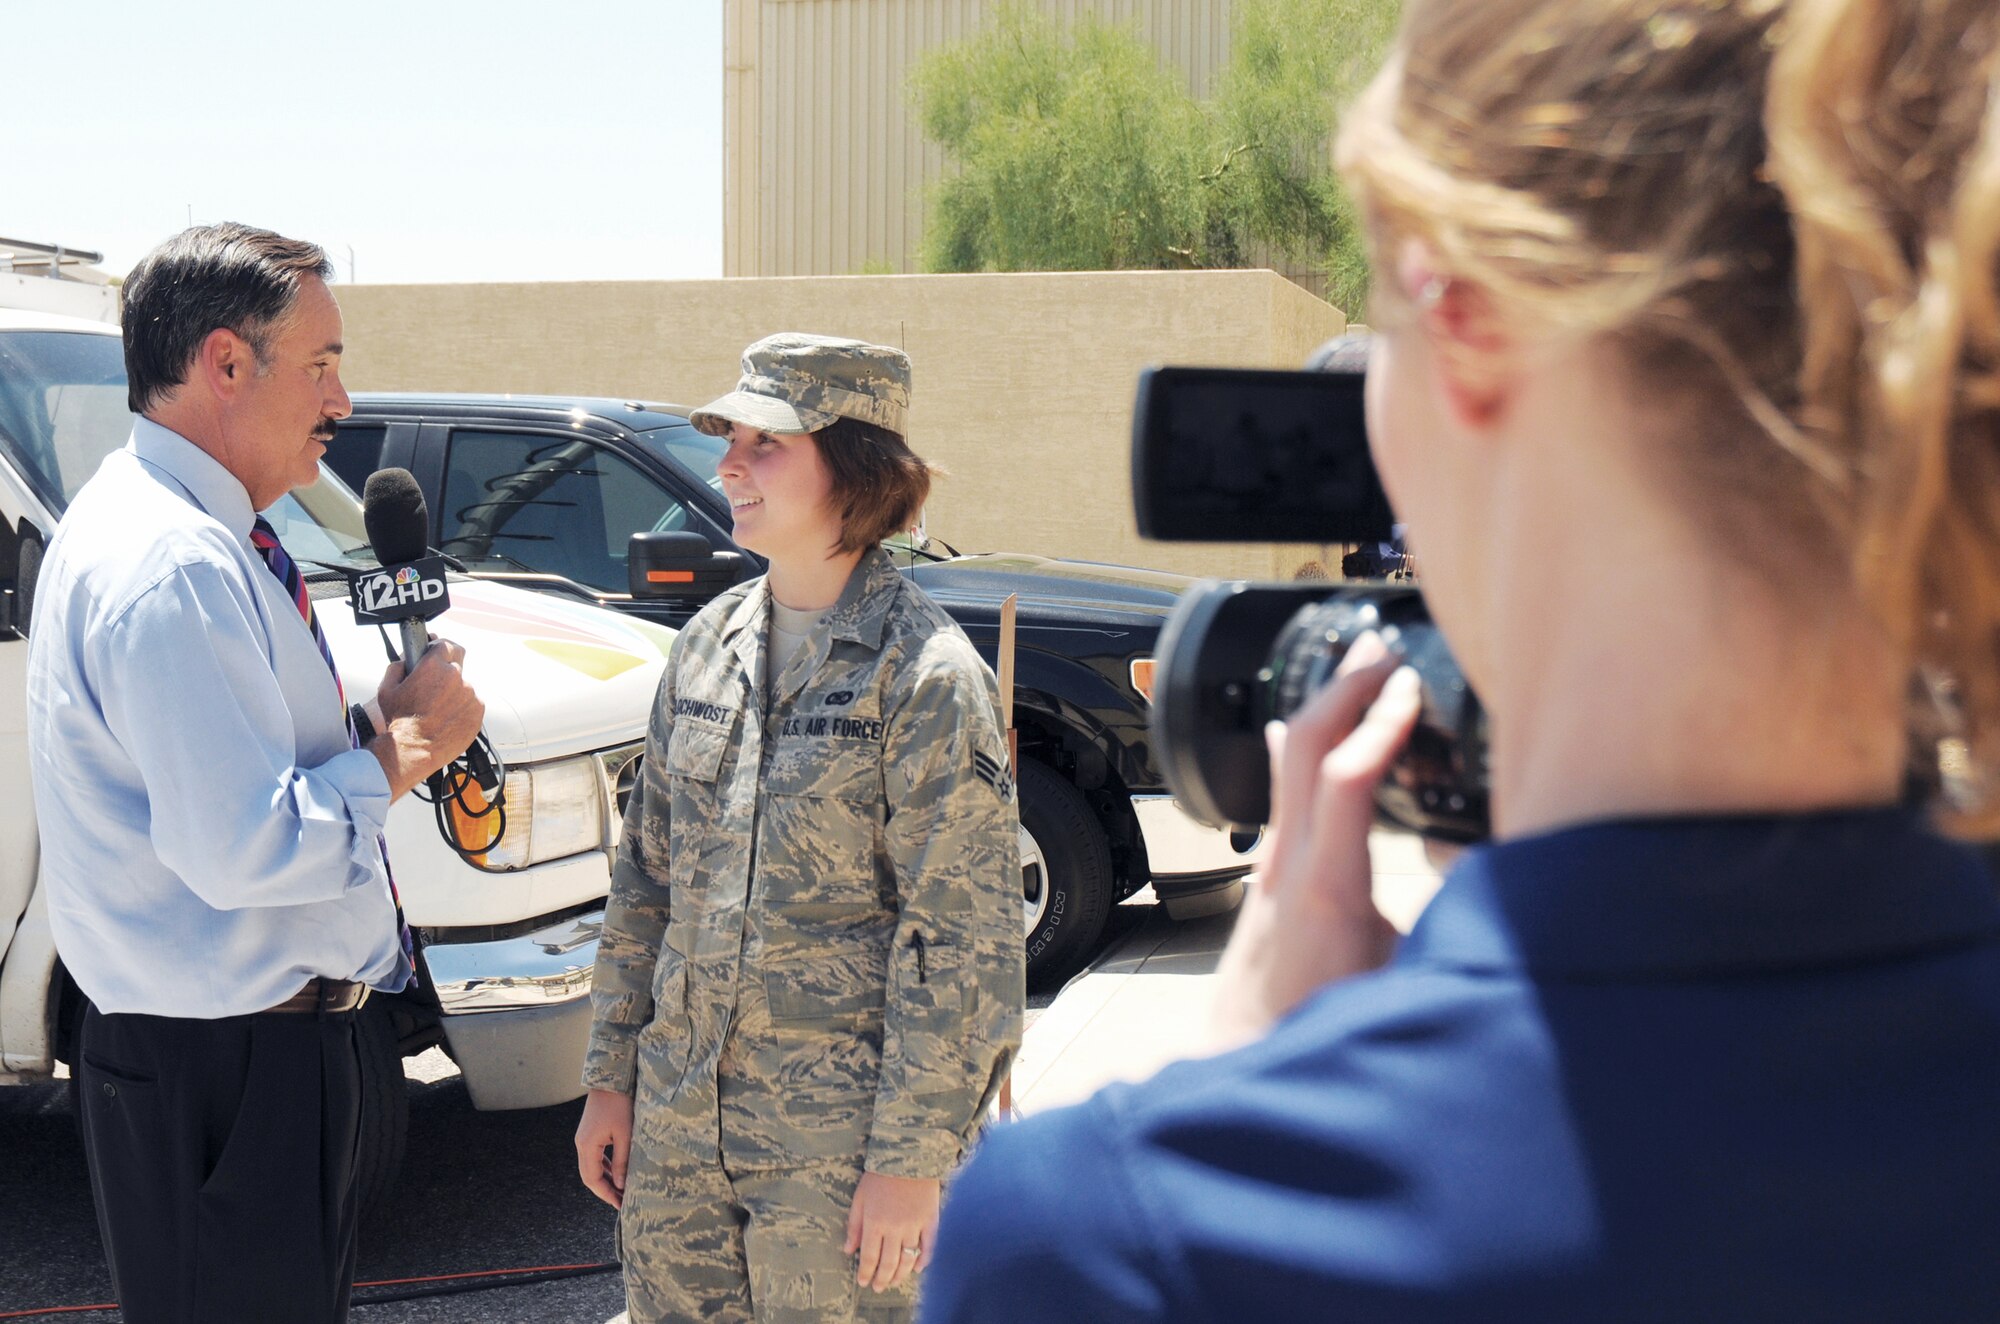 Mark Curtis, Channel 12 news anchor, interviews Senior Airman Melanie Holochwost, 56th Fighter Wing Public Affairs specialist, after their "dog fight," a form of aerial combat between fighter aircraft, in the F-16 simulators May 25 at Luke Air Force Base, Ariz.  Mr. Curtis visited several locations at Luke as a part of Channel 12's 24-hour all-access pass.  Thirteen clips aired May 24 and May 25, informing the local community that F-16 pilots are just one element of Luke's mission.  Without maintainers, life support technicians, air traffic controllers and other "behind-the-scenes" Airmen, pilots wouldn't be able to do their jobs safely and effectively. To view the coverage, visit www.azcentral.com/12news/news/articles/2011/05/25/20110525luke-air-force-base-mark-curtis.html.  (U.S. Air Force photo by Staff Sgt. Denise Willhite) (The appearance of hyperlinks does not constitute endorsement by the 56th Fighter Wing, the United States Air Force, or the Department of Defense of the external Web site, or the information, products, or services contained therein. For other than authorized activities such as military exchanges and Services/Morale, Welfare and Recreation (MWR) sites, the United States Air Force does not exercise any editorial control over the information you may find at these locations. Such links are provided consistent with the stated purpose of the Web site.)